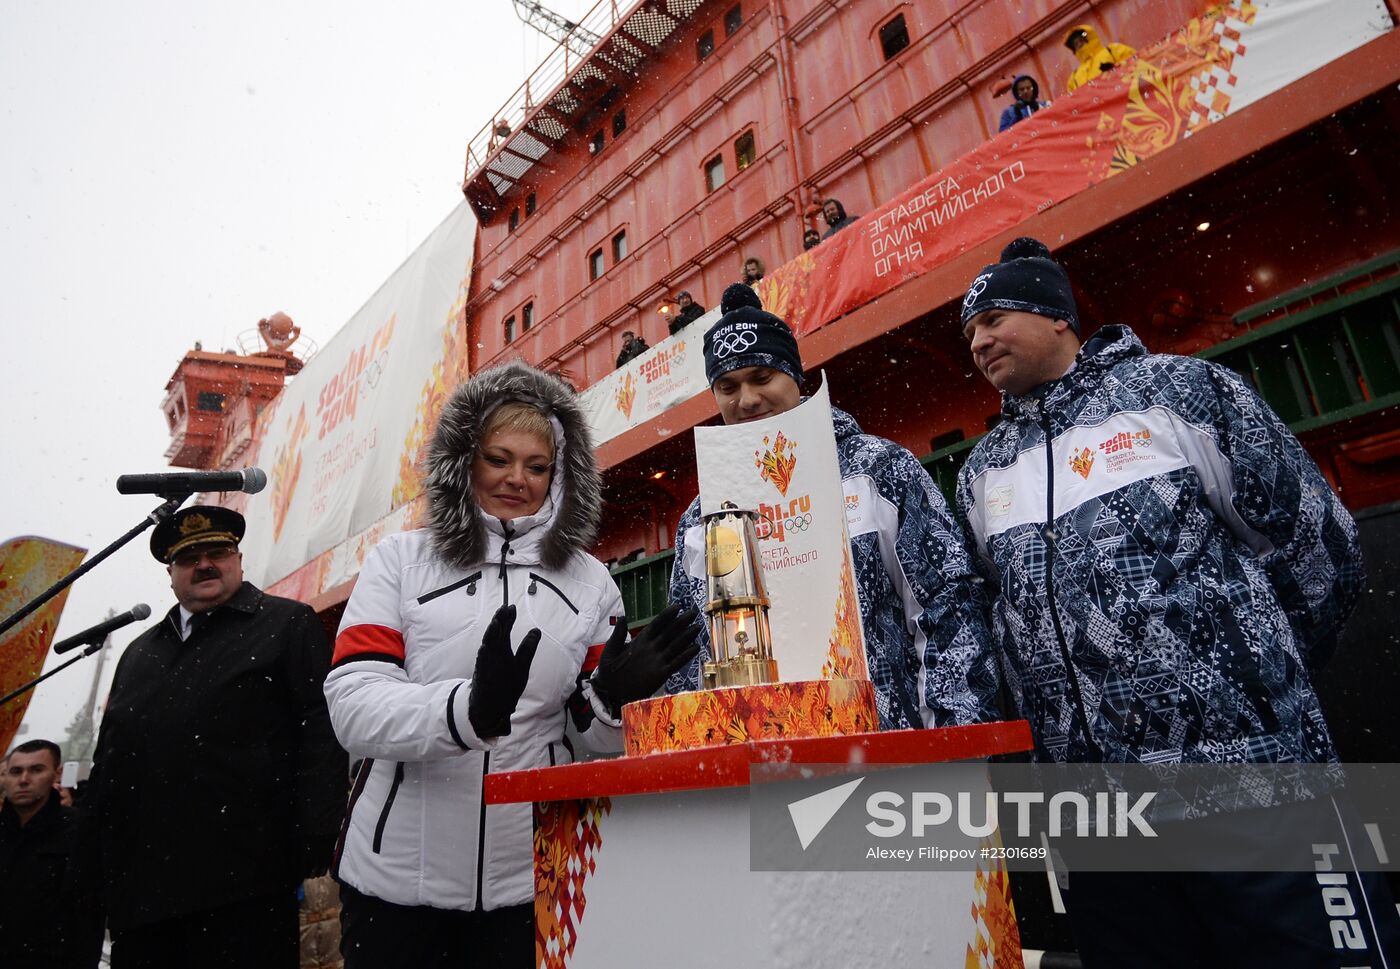 Icebreaker with Olympic torch heads to North Pole